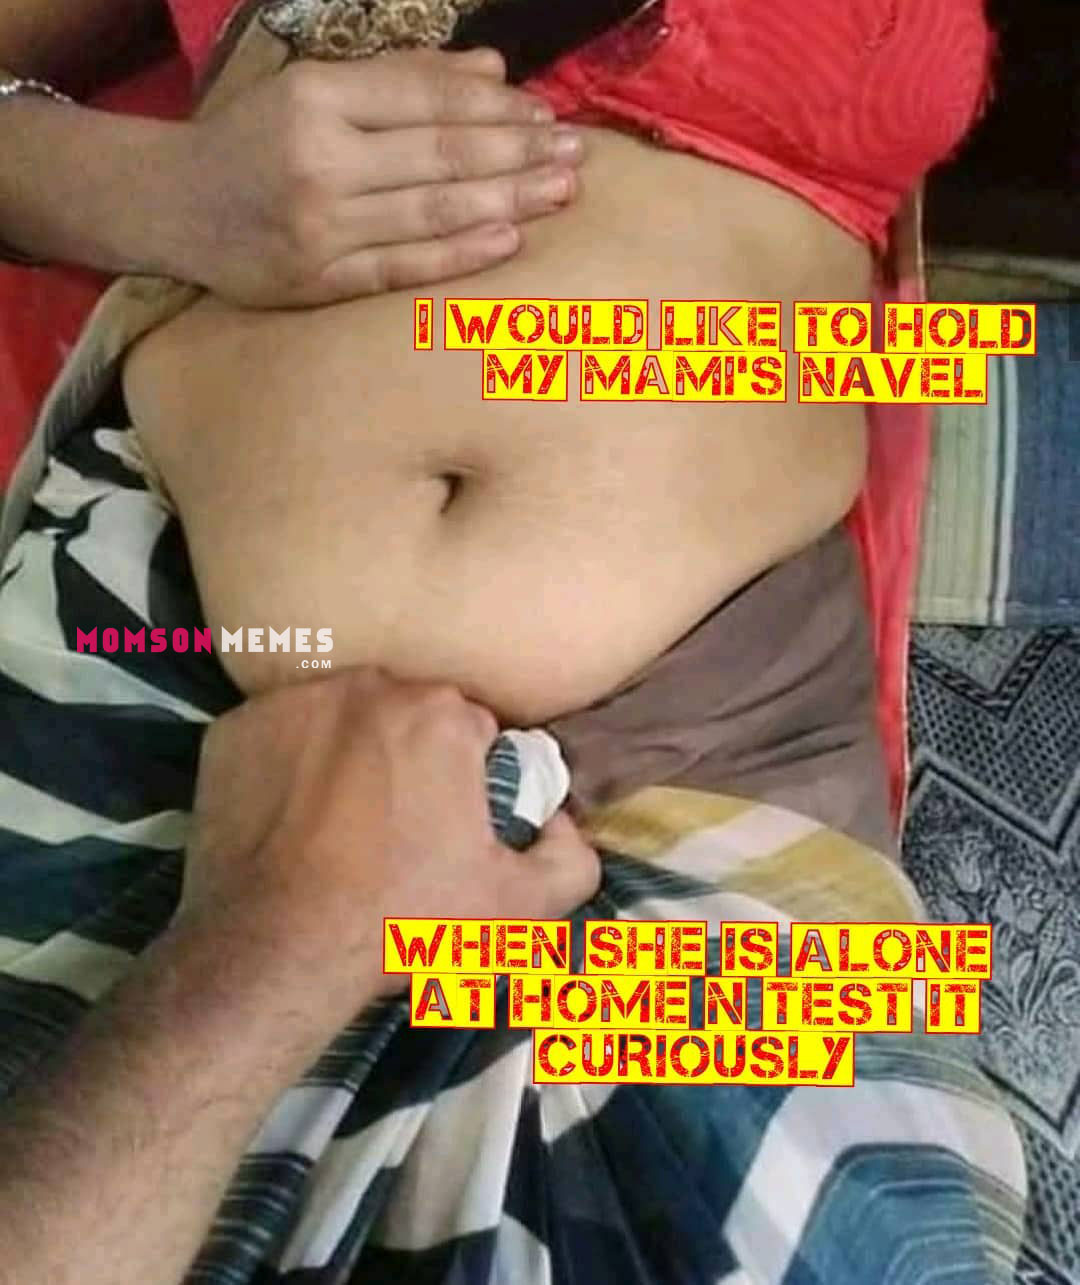 Mom Updress Hd Son - Indian Mom Son Memes Archives - Page 19 of 42 - Incest Mom Son Captions  Memes